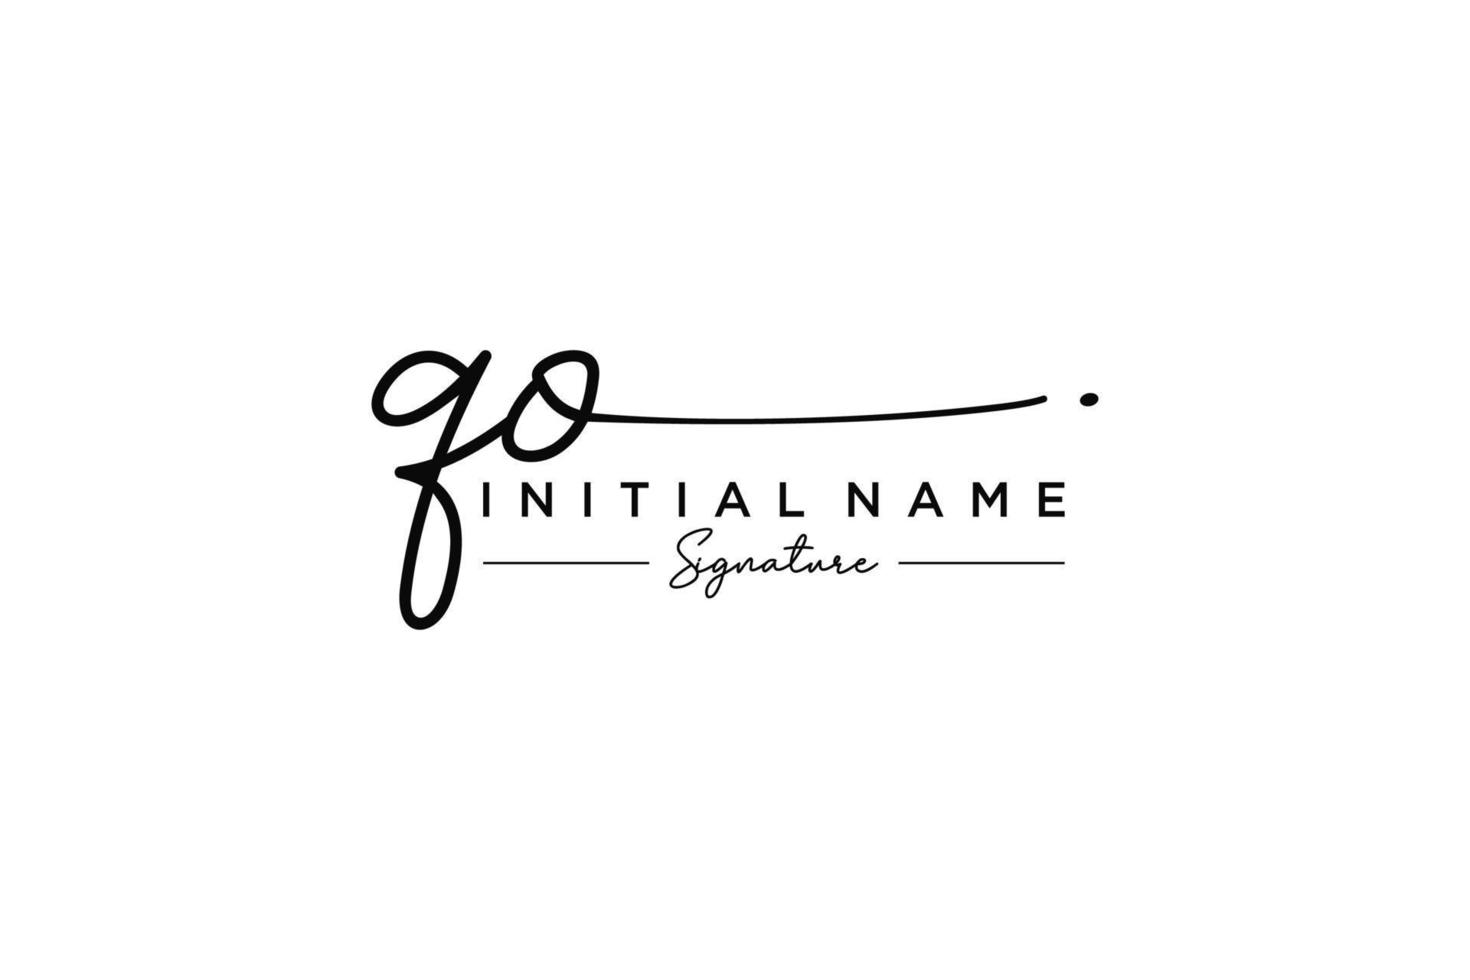 Initial QO signature logo template vector. Hand drawn Calligraphy lettering Vector illustration.